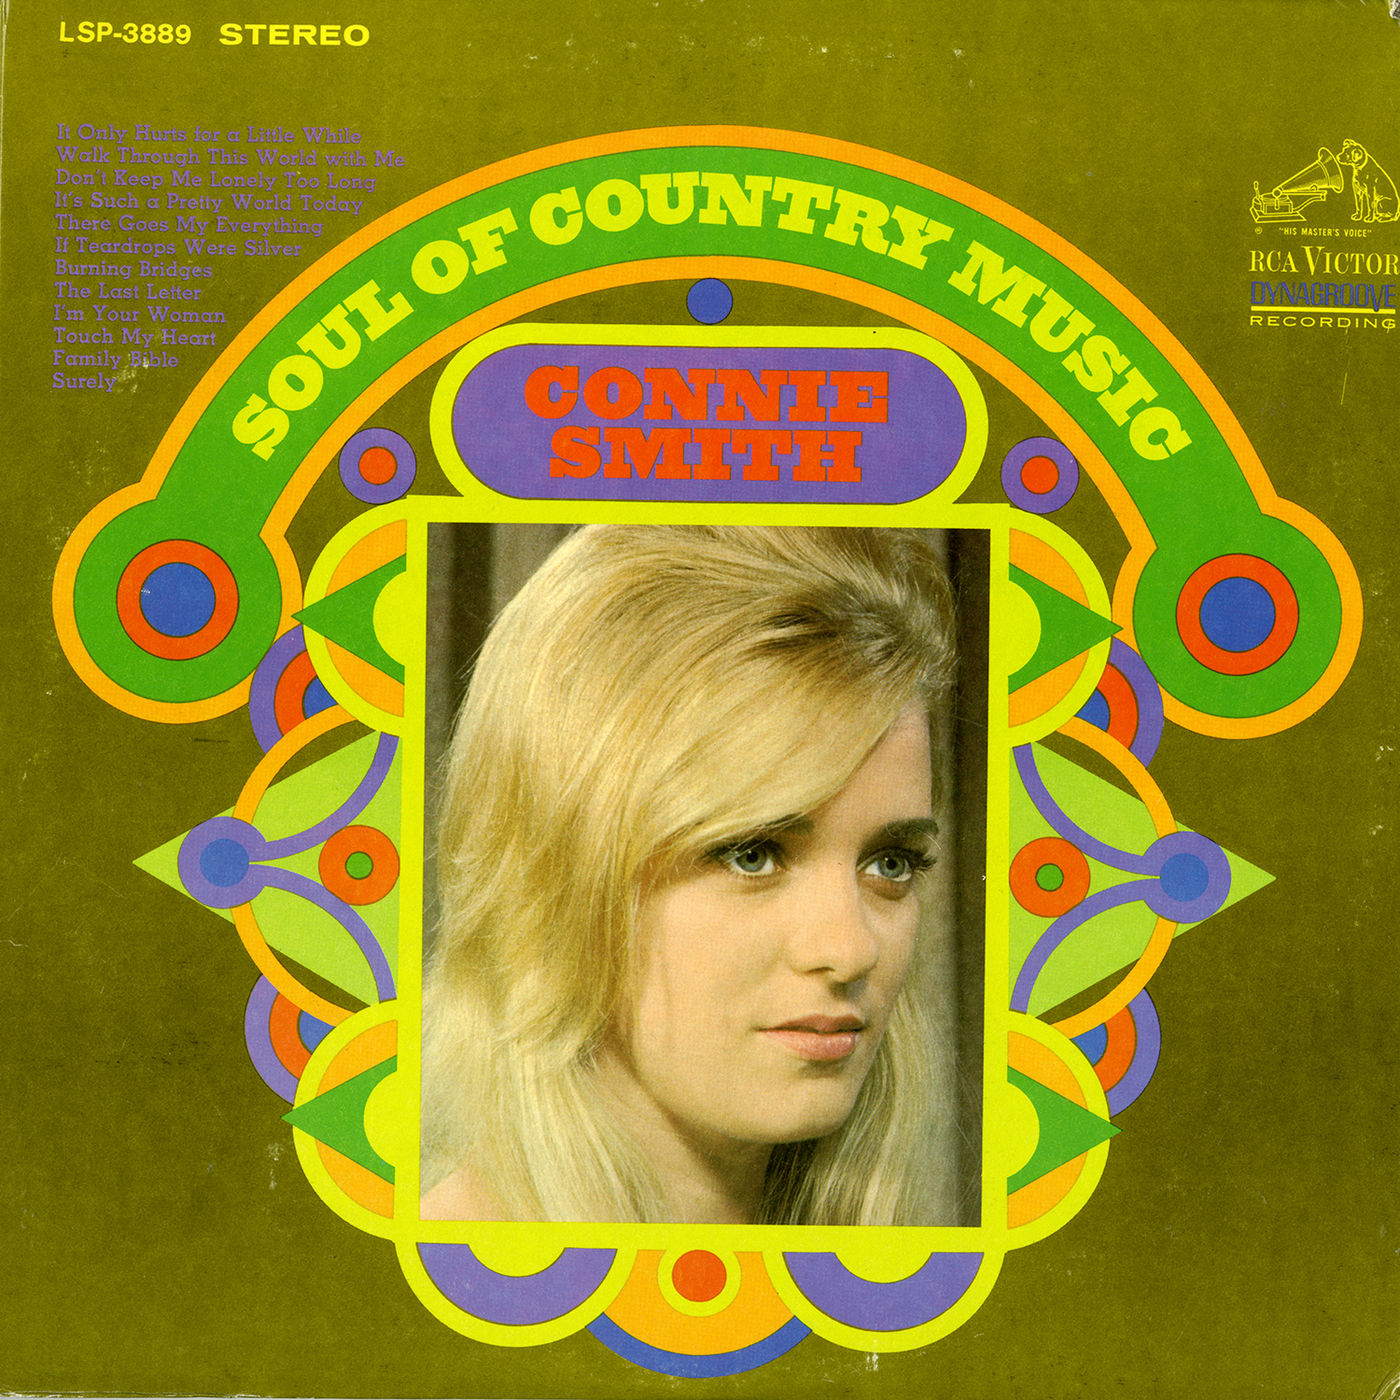 Connie Smith – Soul of Country Music